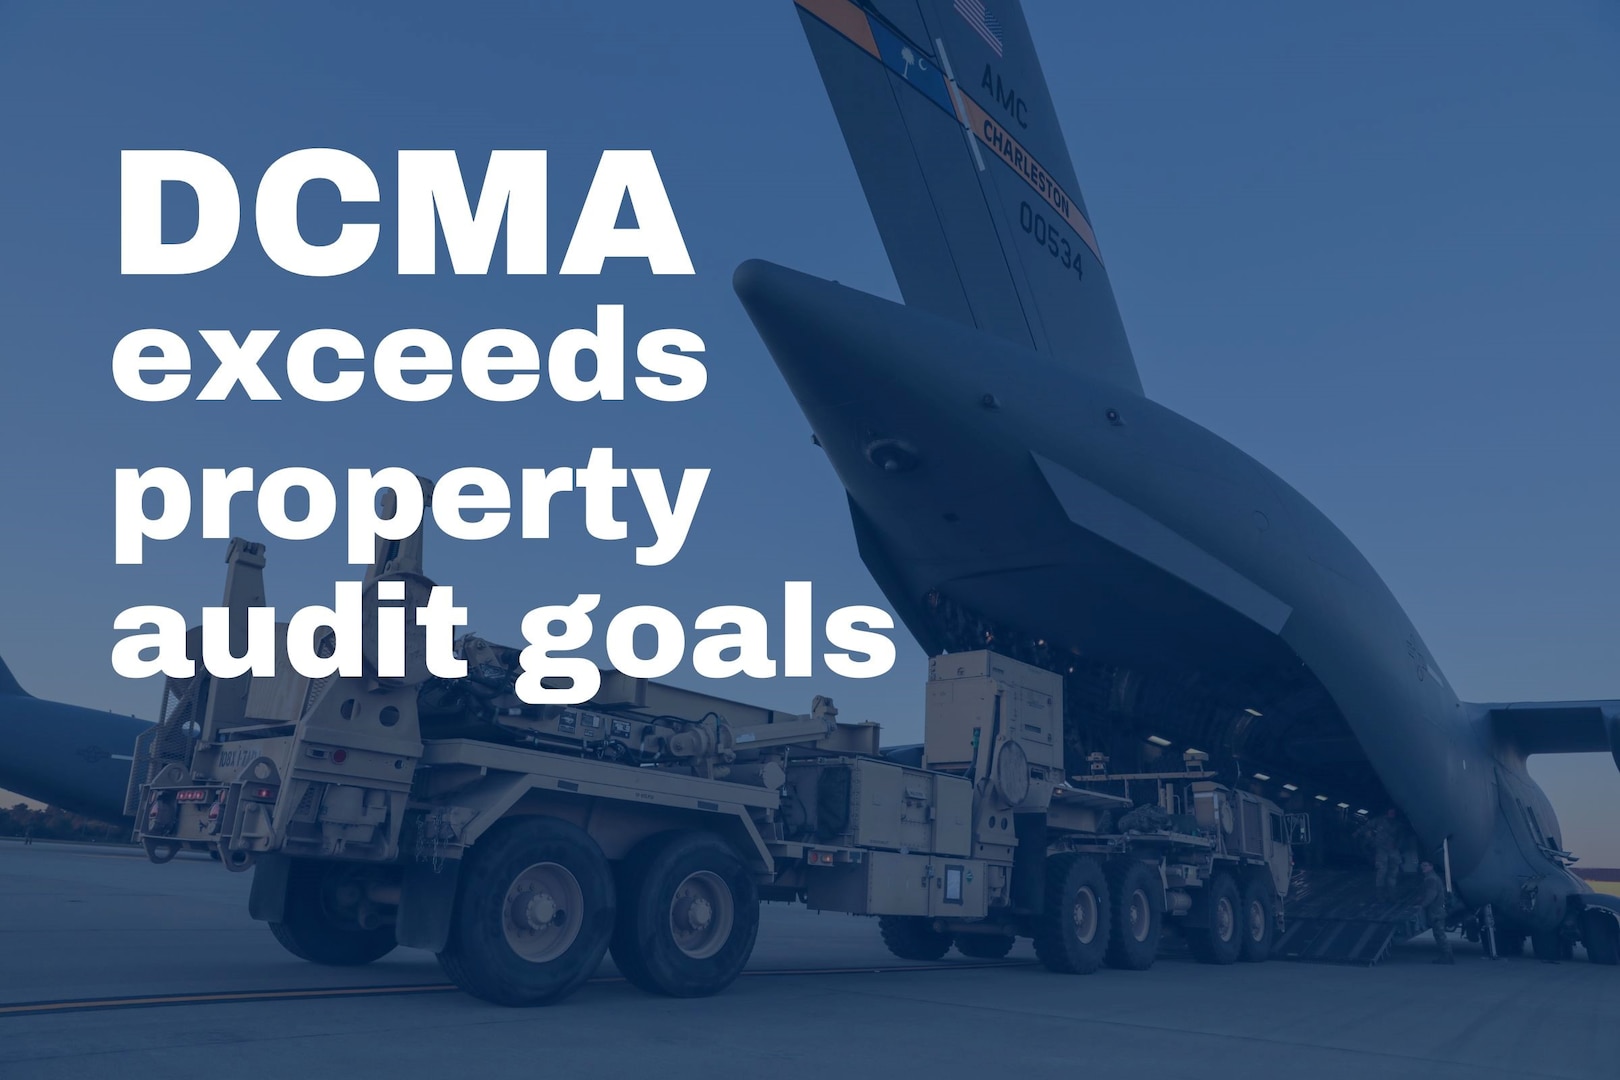 Photo of large trucks getting loaded into the back of a military aircraft with text over it that reads "DCMA exceeds property audit goals"